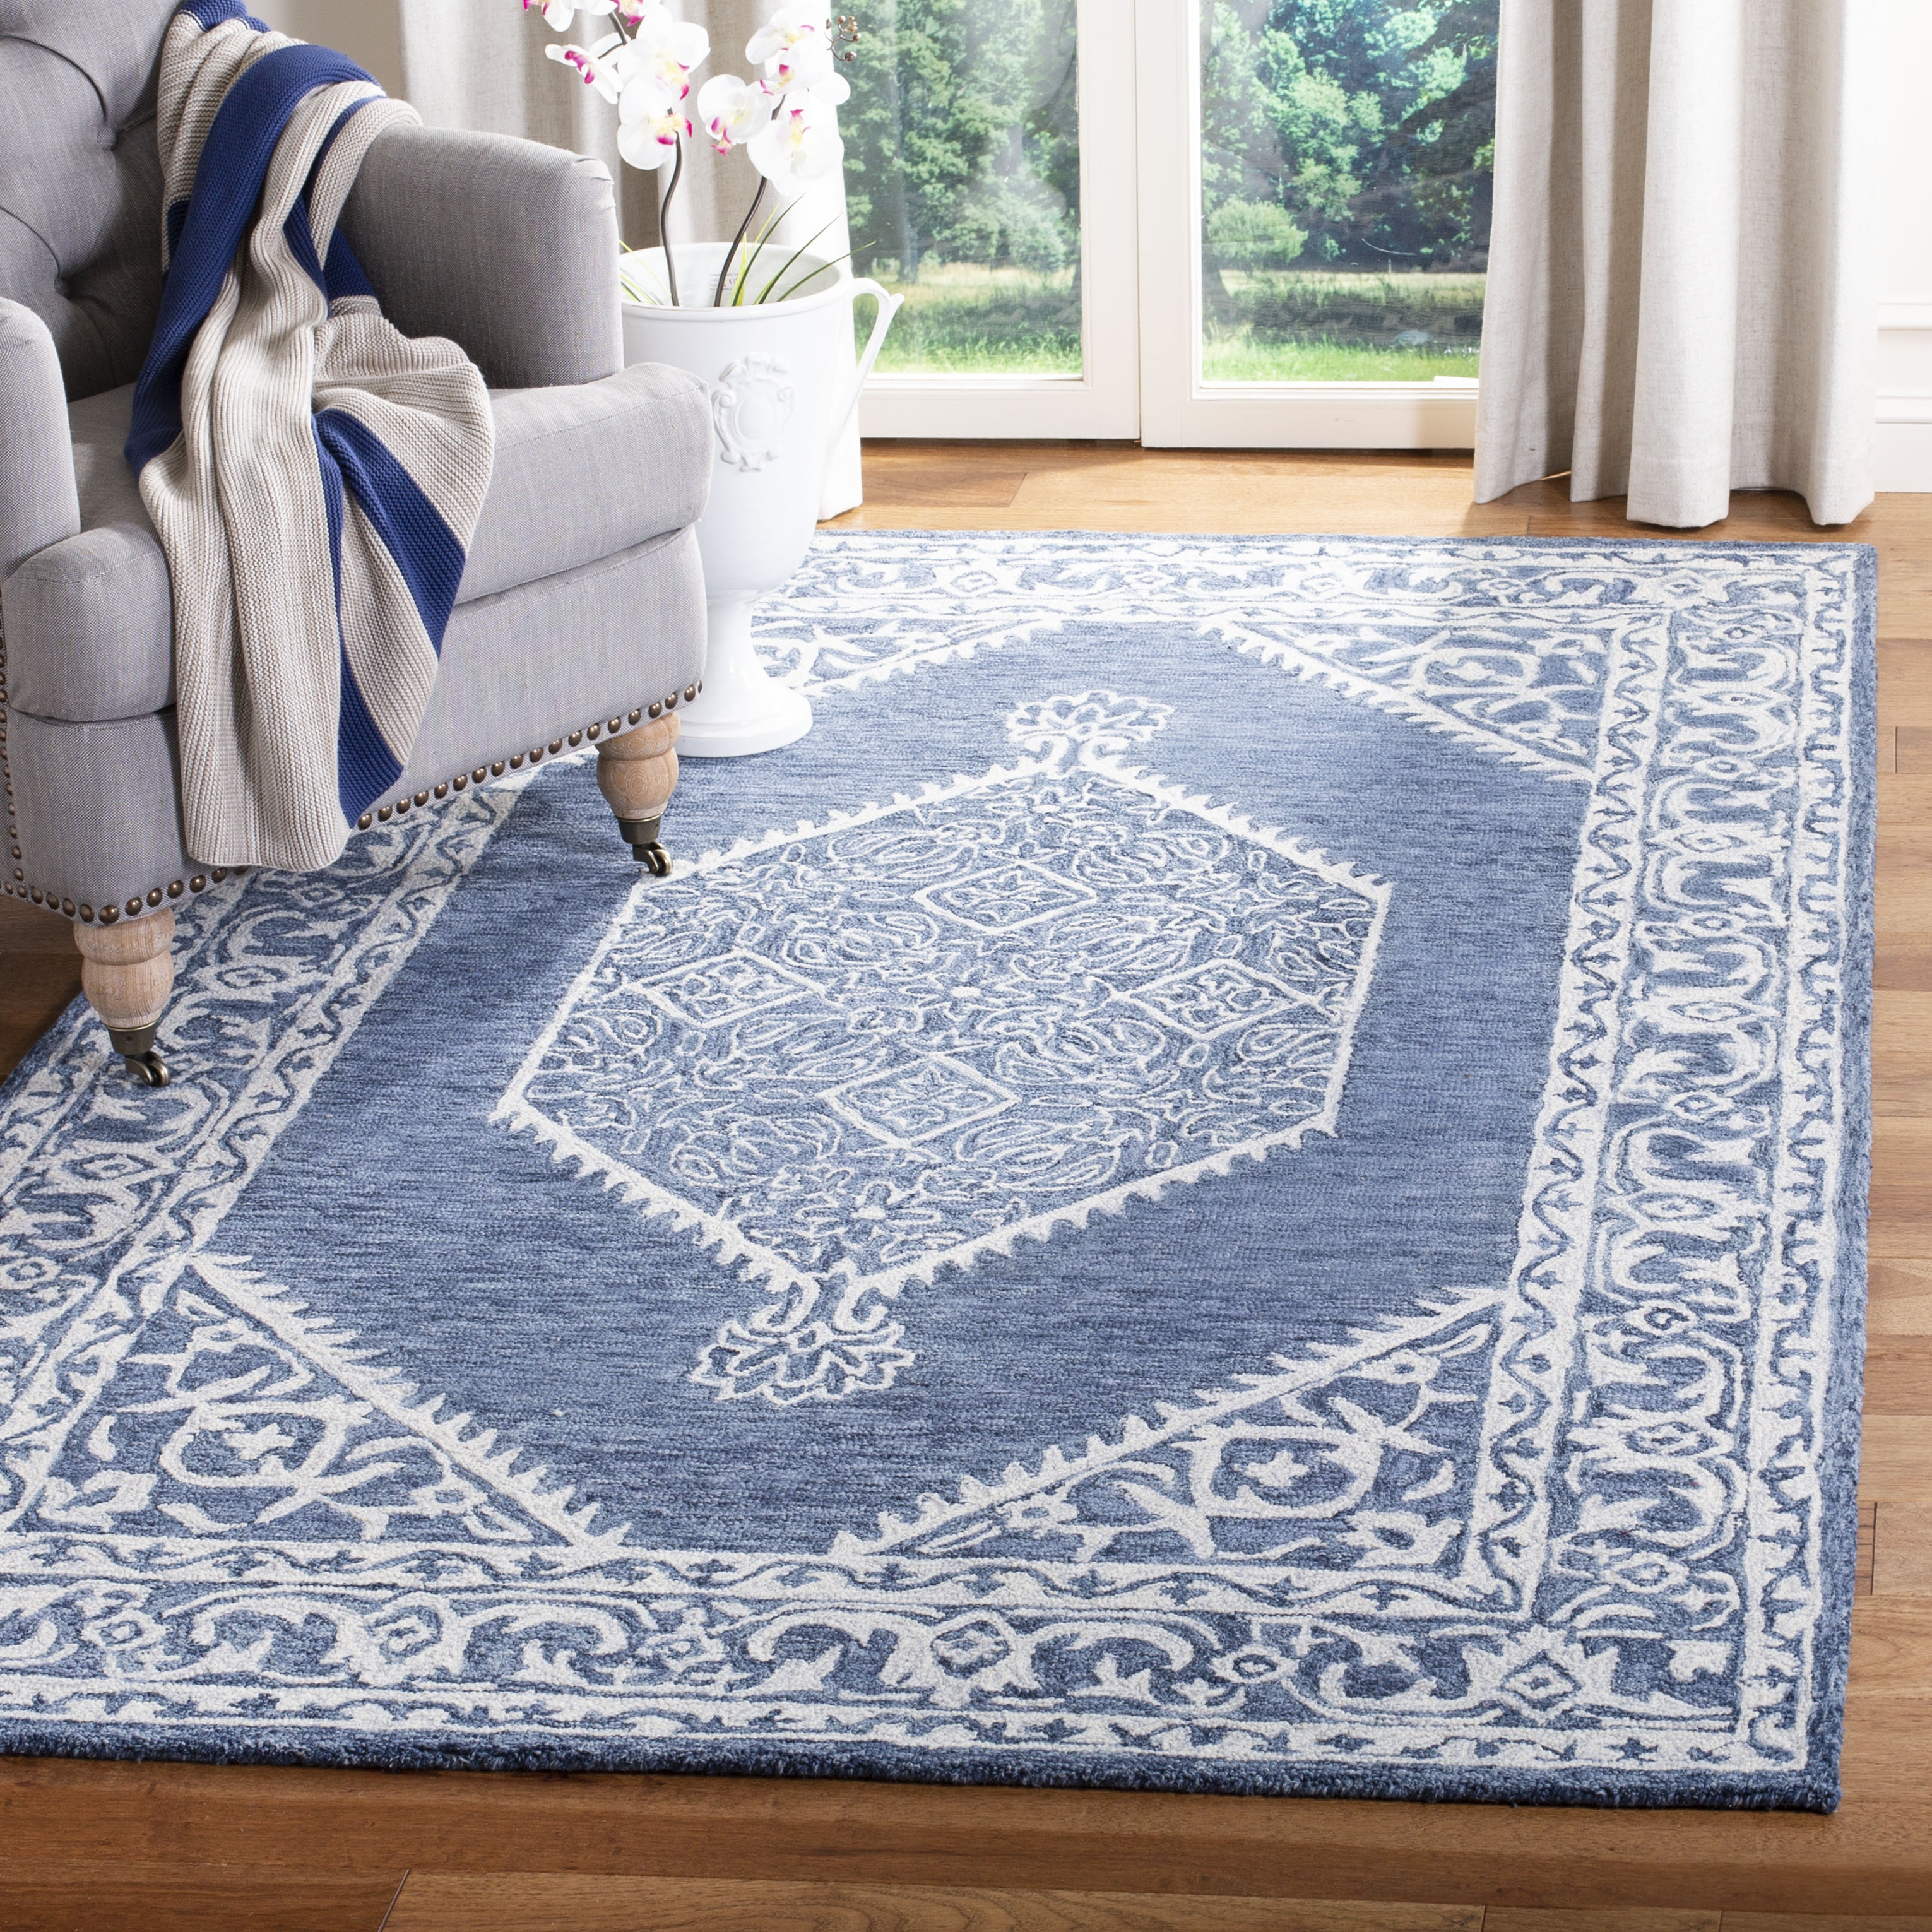 Arlo Home Hand Tufted Area Rug, MLP605M, Blue/Ivory,  5' X 8' - Image 1